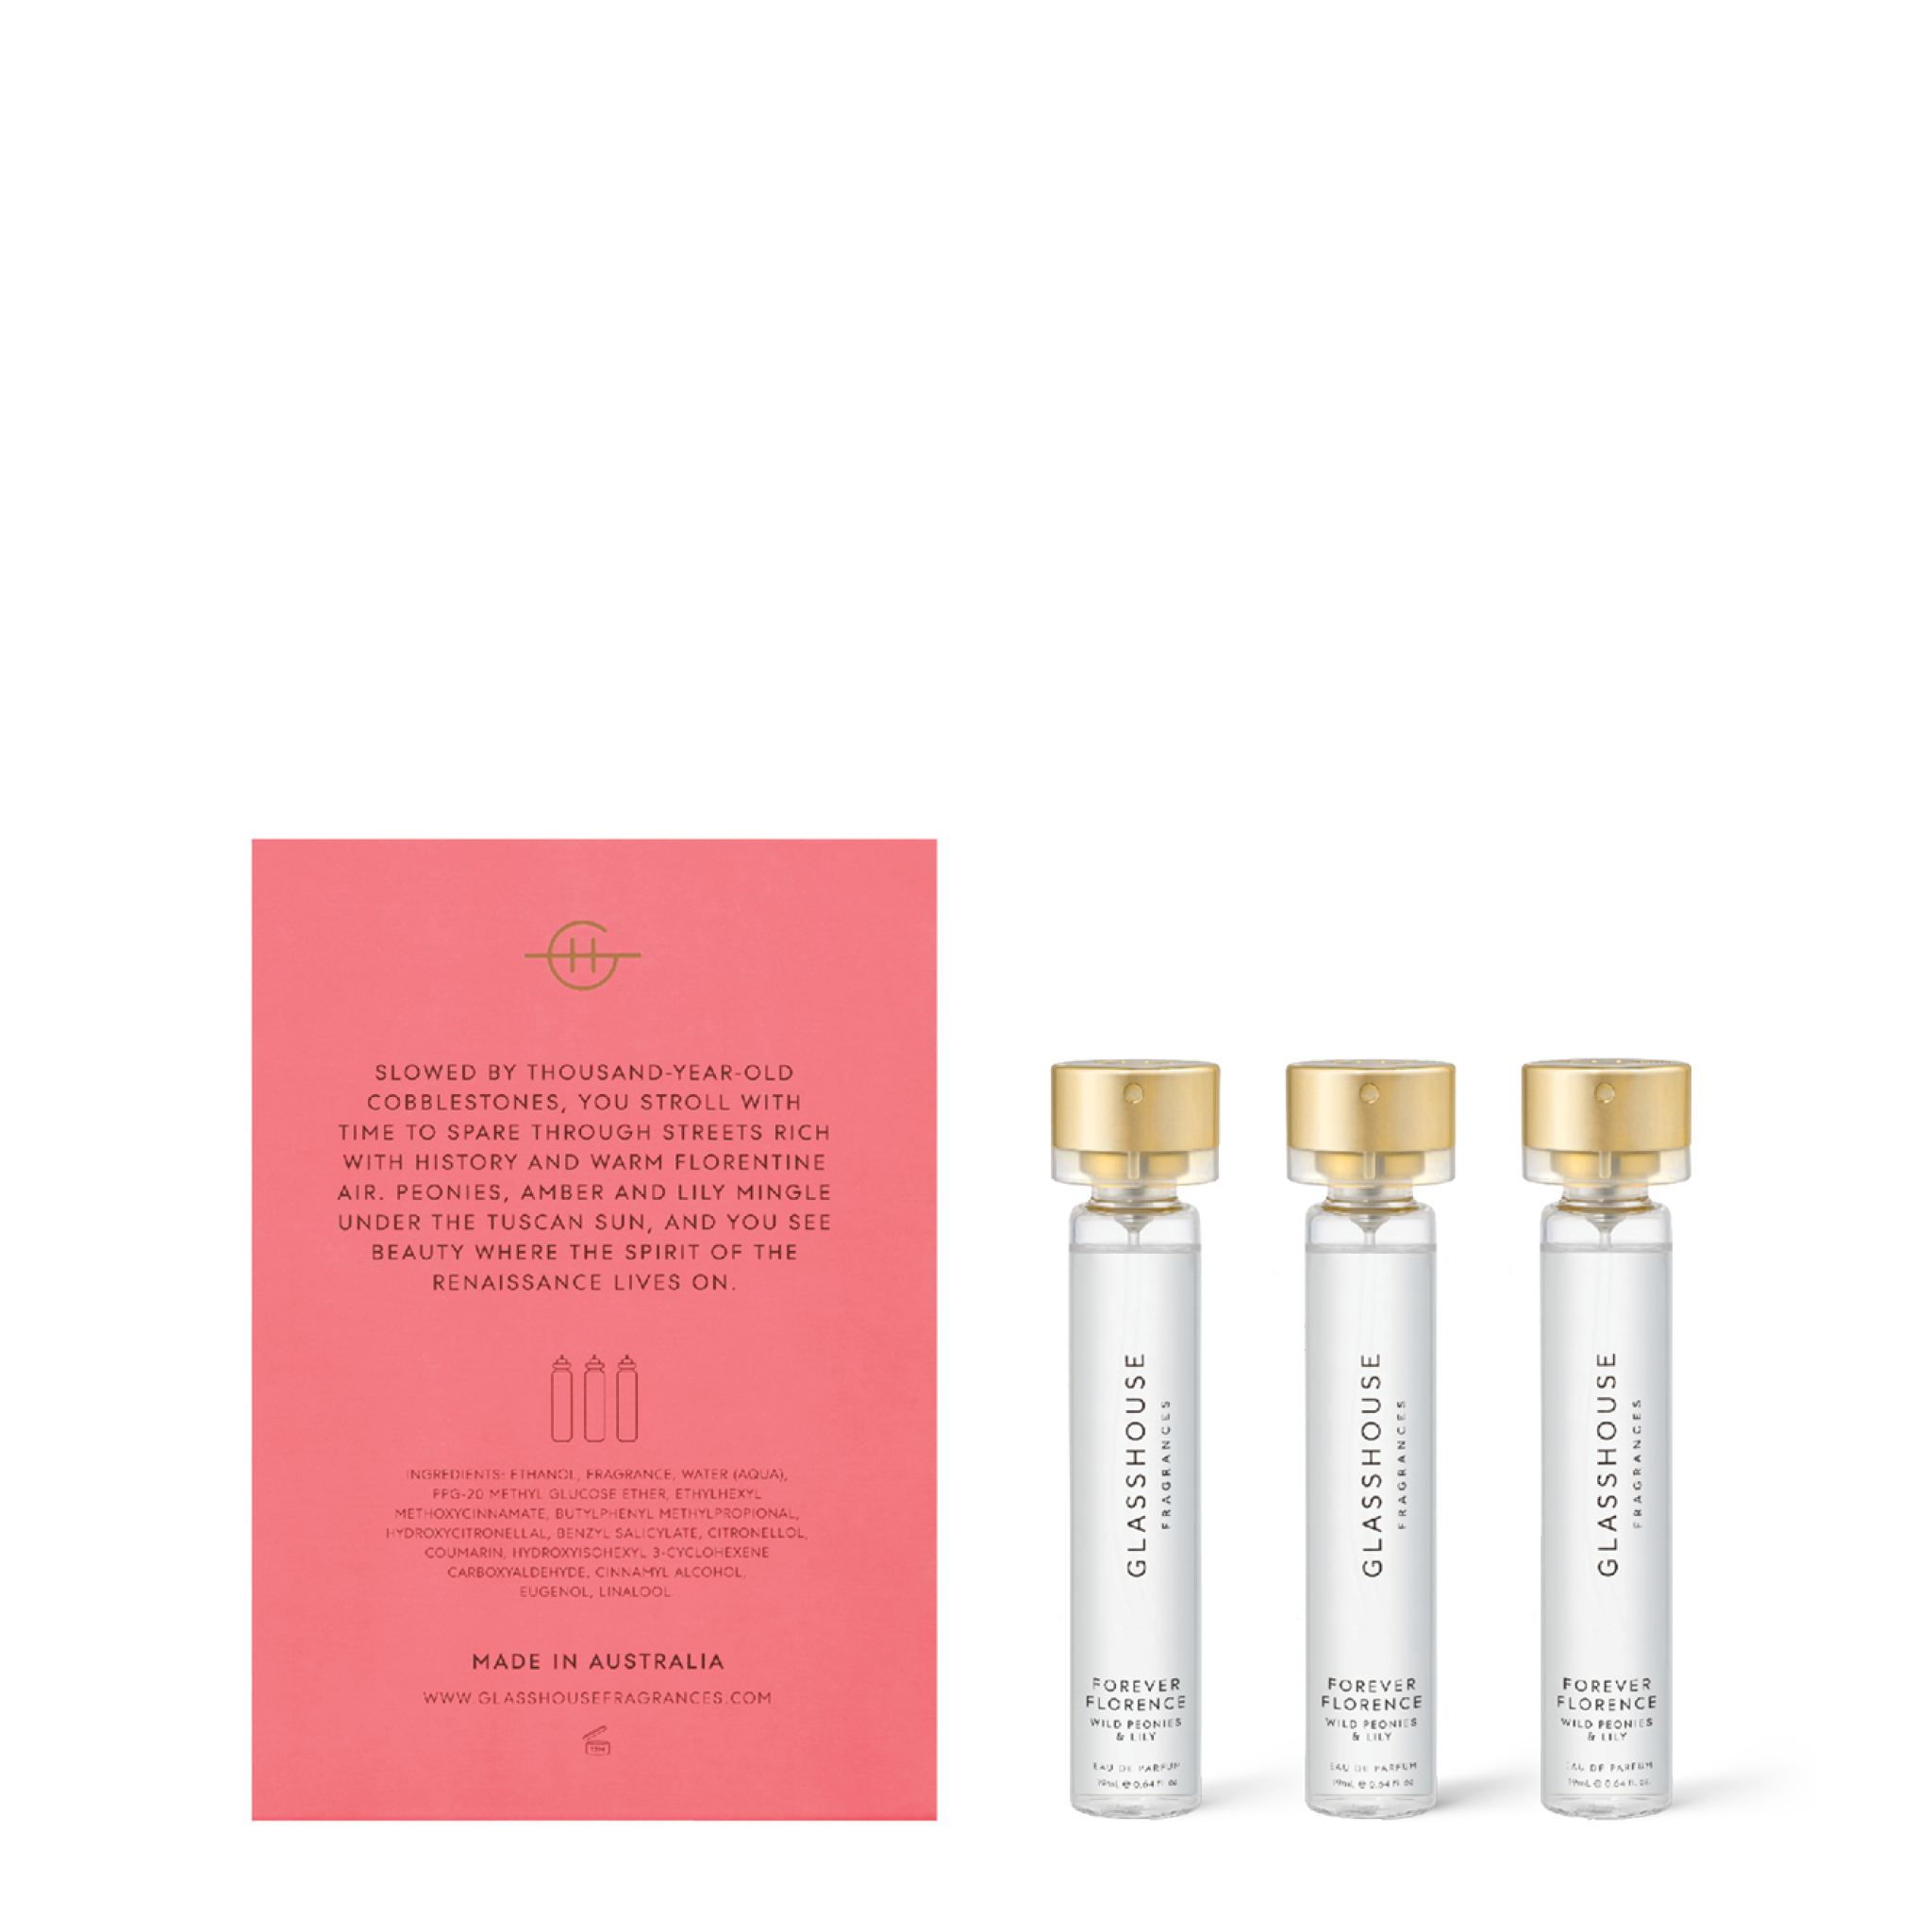 Glasshouse Fragrances Forever Florence Wild Peonies and Lily three atomiser fragrance refill vials with box - back of product shot